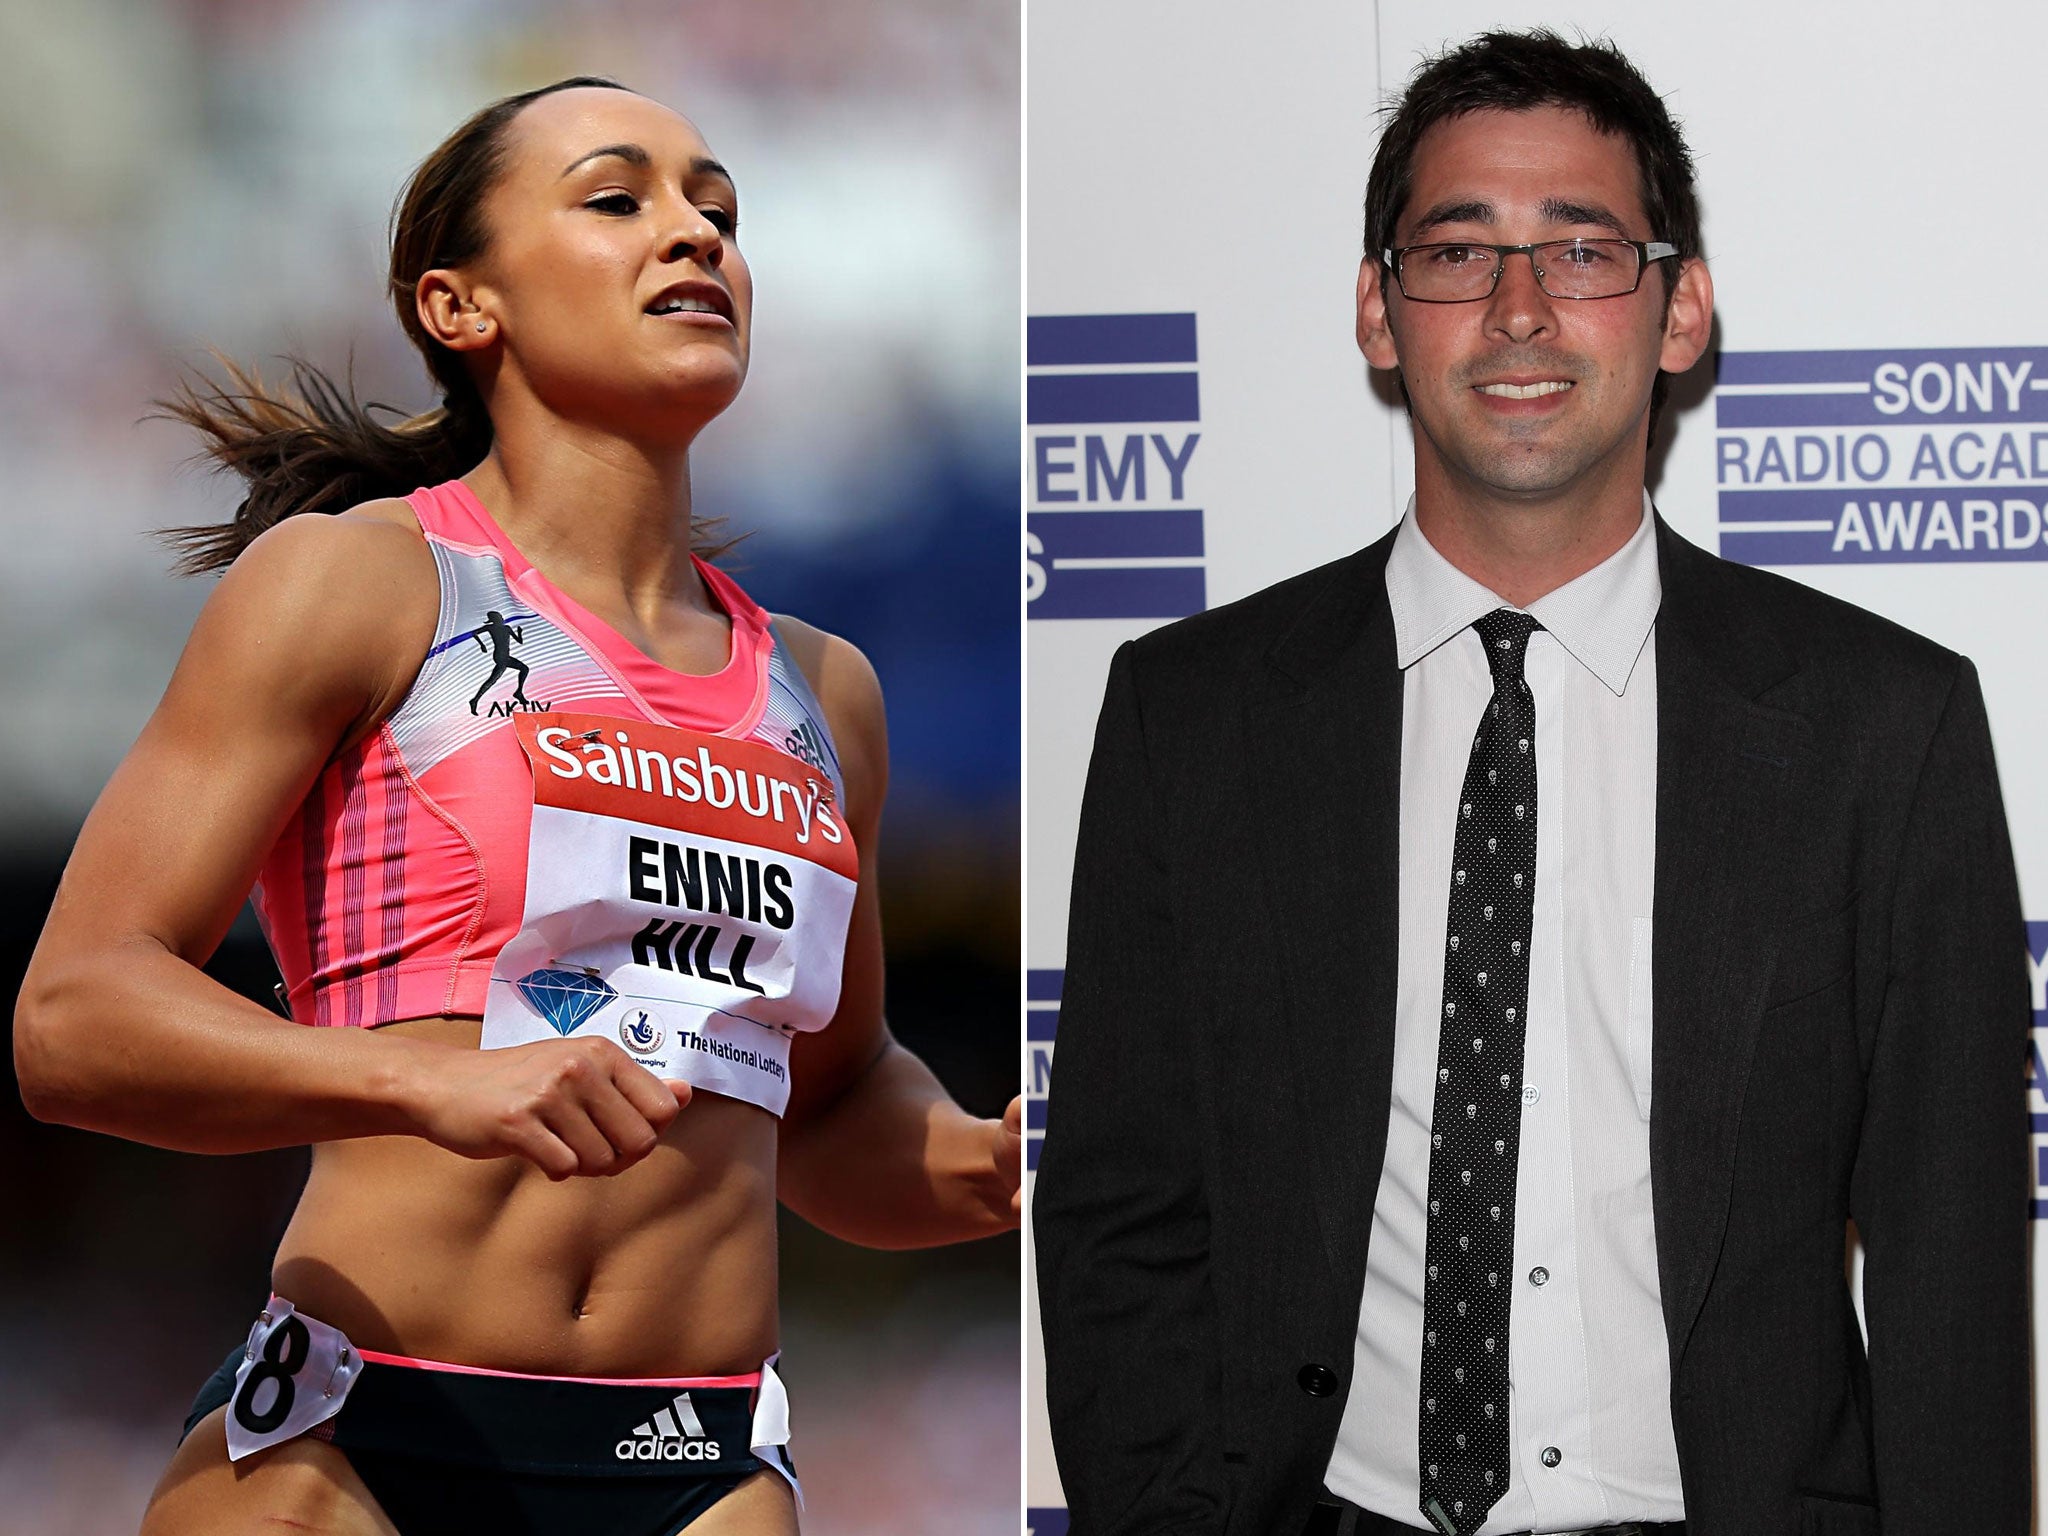 BBC presenter Colin Murray made comments about Olympic gold medallist Jessica Ennis-Hill's 'bottom'